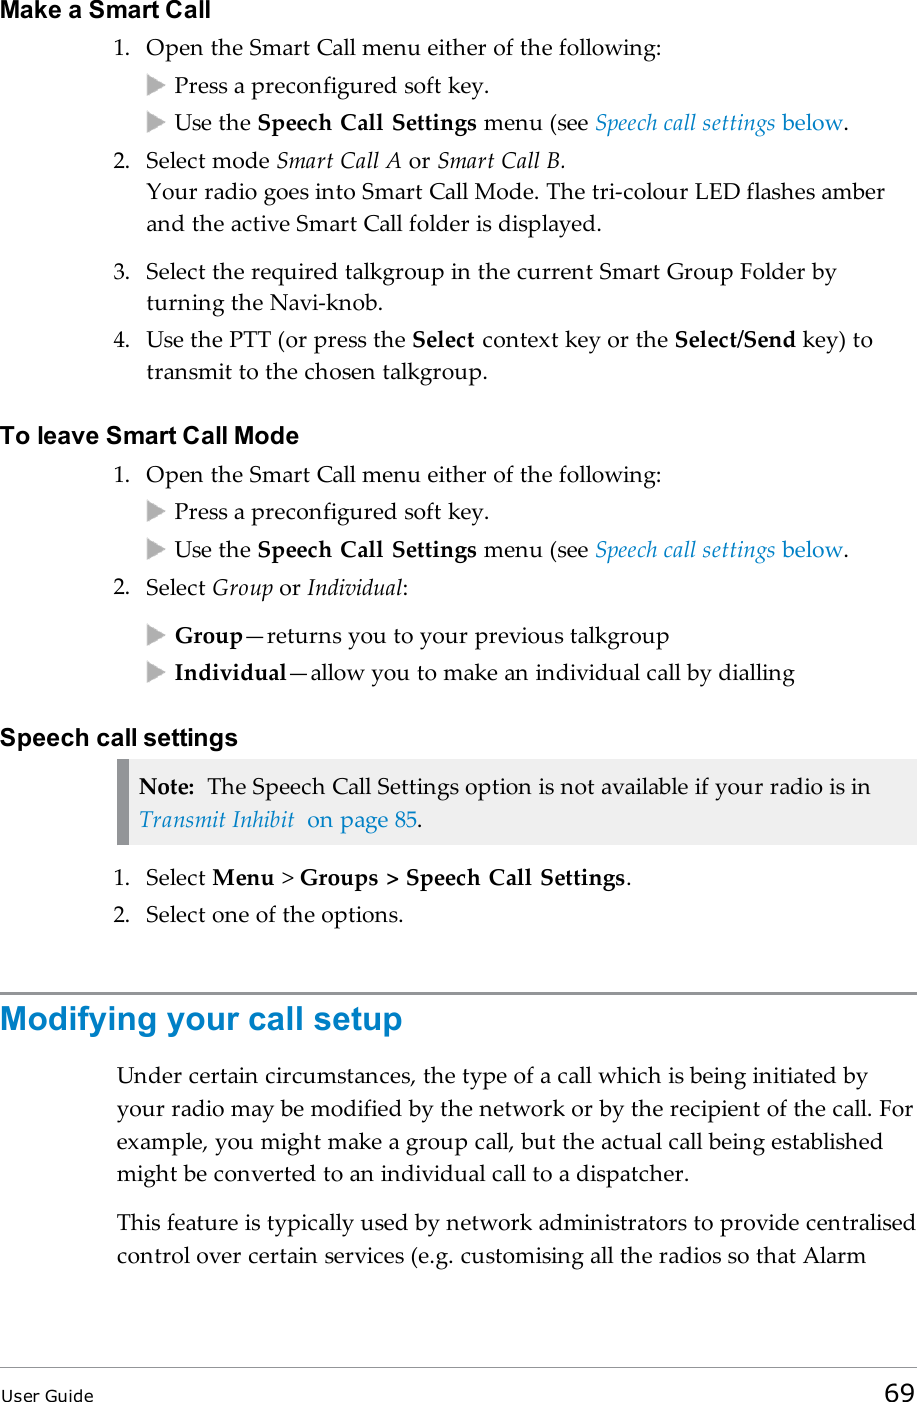 Make a Smart Call1. Open the Smart Call menu either of the following:Press a preconfigured soft key.Use the Speech Call Settings menu (see Speech call settings below.2. Select mode Smart Call A or Smart Call B.Your radio goes into Smart Call Mode. The tri-colour LED flashes amberand the active Smart Call folder is displayed.3. Select the required talkgroup in the current Smart Group Folder byturning the Navi-knob.4. Use the PTT (or press the Select context key or the Select/Send key) totransmit to the chosen talkgroup.To leave Smart Call Mode1. Open the Smart Call menu either of the following:Press a preconfigured soft key.Use the Speech Call Settings menu (see Speech call settings below.2. Select Group or Individual:Group—returns you to your previous talkgroupIndividual—allow you to make an individual call by diallingSpeech call settingsNote: The Speech Call Settings option is not available if your radio is inTransmit Inhibit on page 85.1. Select Menu &gt;Groups &gt; Speech Call Settings.2. Select one of the options.Modifying your call setupUnder certain circumstances, the type of a call which is being initiated byyour radio may be modified by the network or by the recipient of the call. Forexample, you might make a group call, but the actual call being establishedmight be converted to an individual call to a dispatcher.This feature is typically used by network administrators to provide centralisedcontrol over certain services (e.g. customising all the radios so that AlarmUser Guide 69